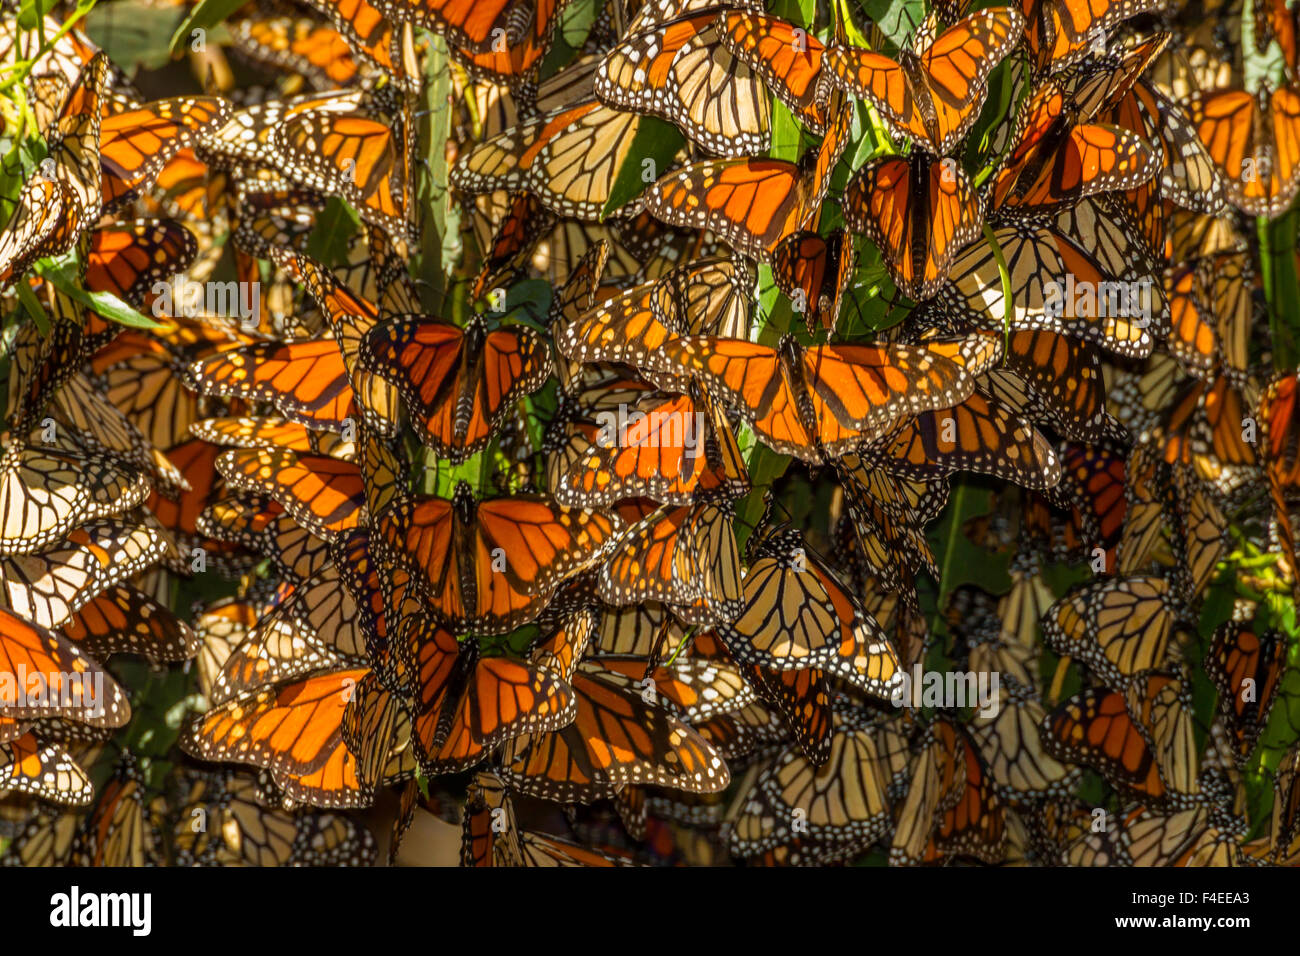 Annual migration of monarch butterflies in California shows sign